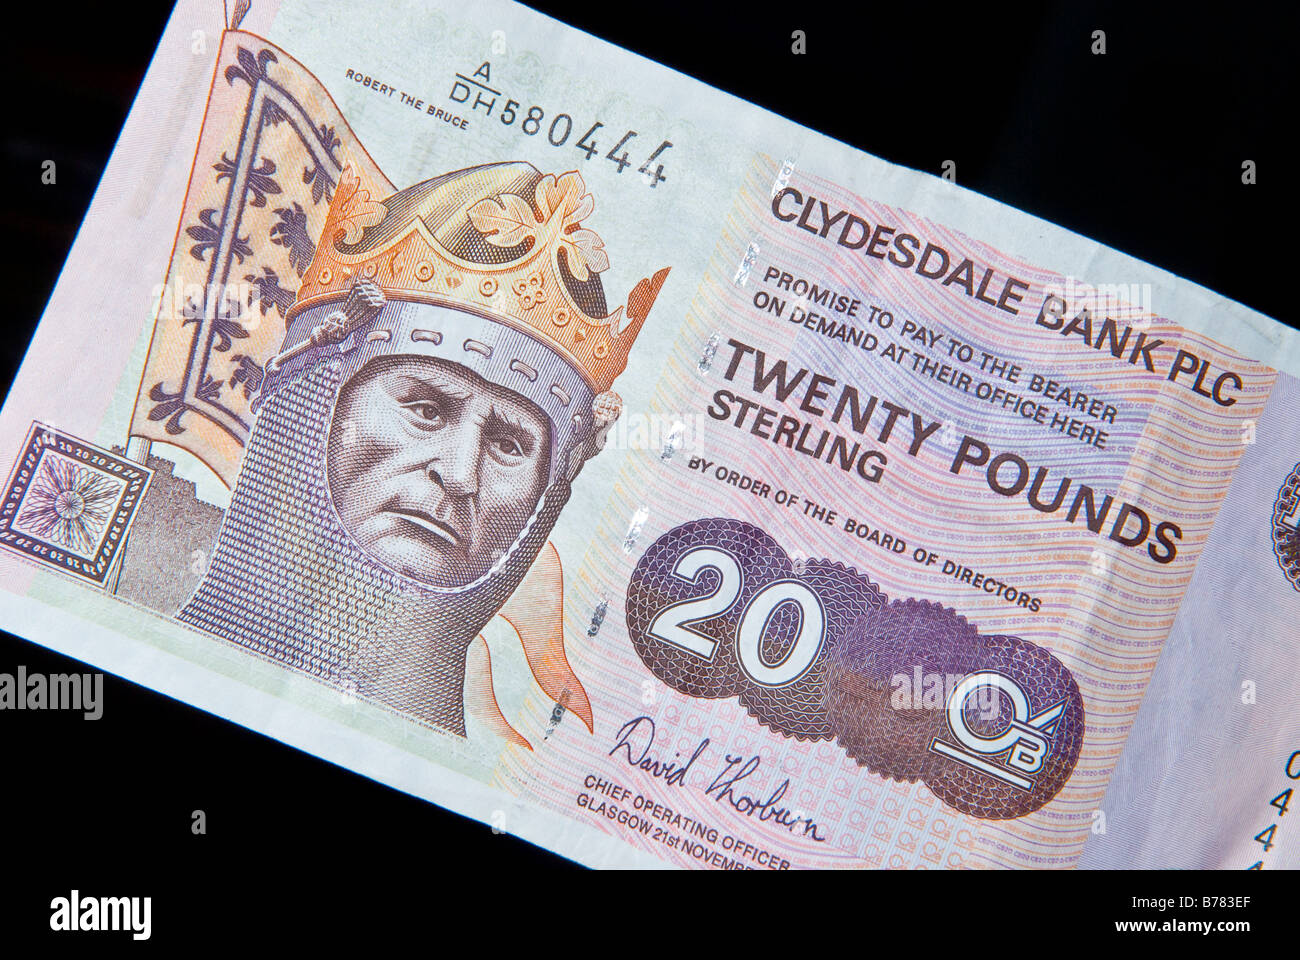 Clydesdale Bank (Scotland) £20 note - front side. Stock Photo